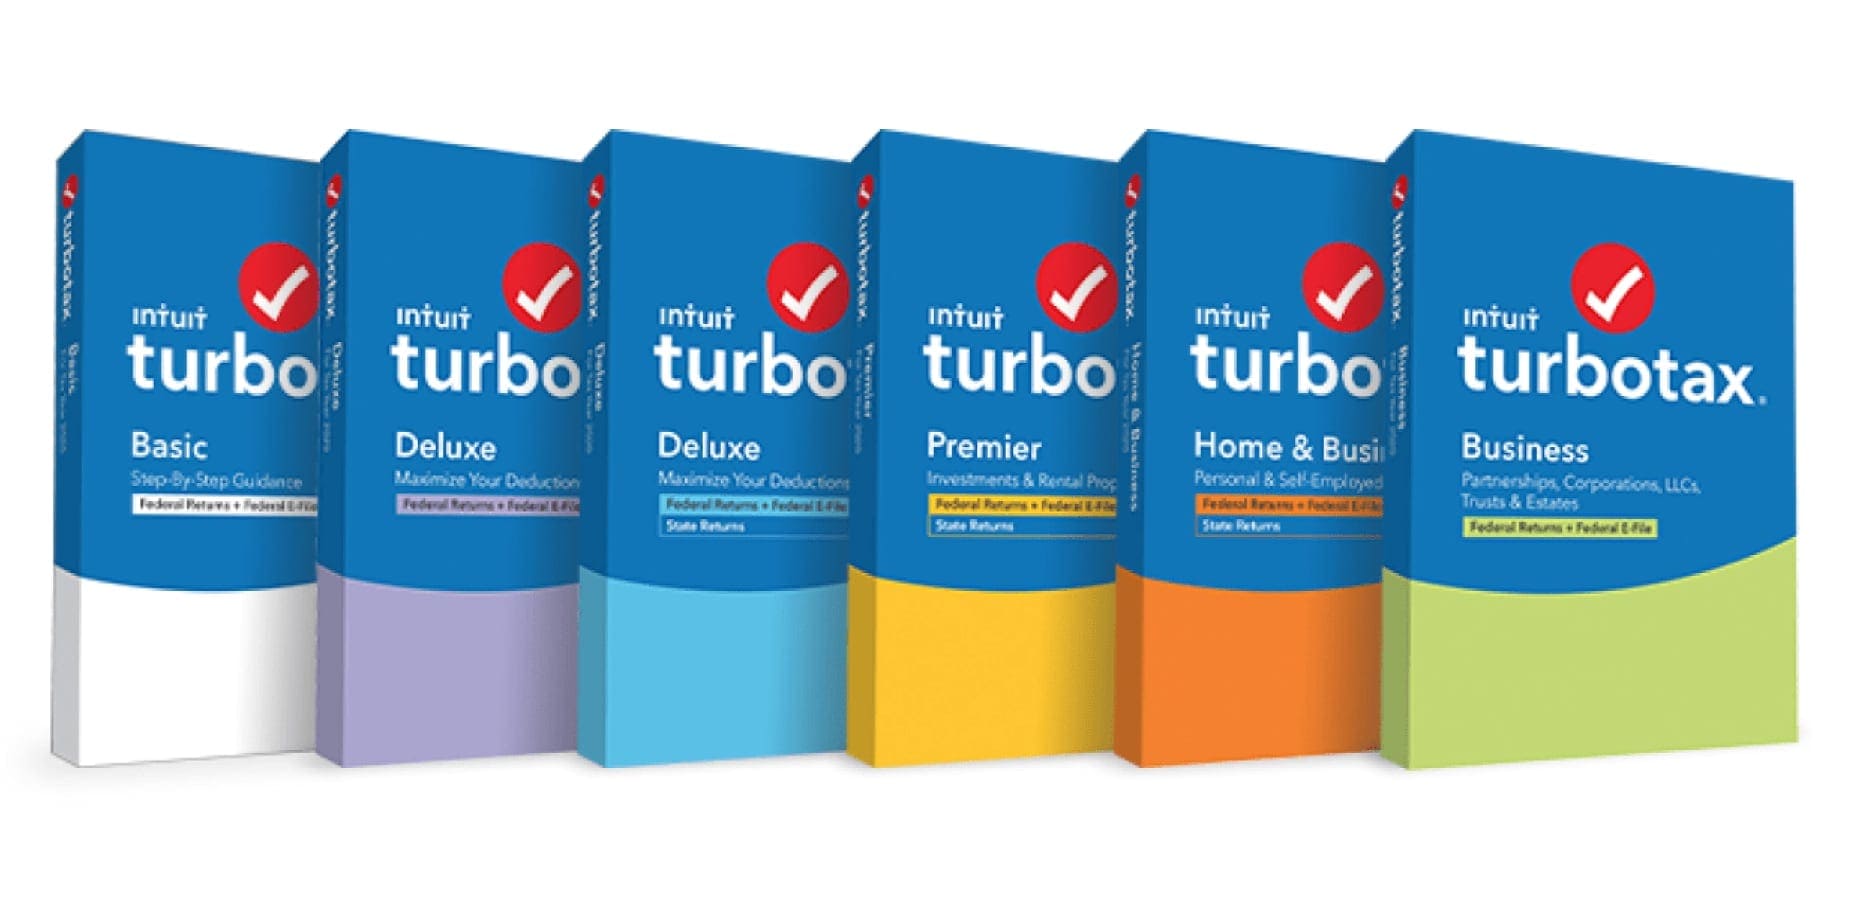 2017 cd turbotax home and business